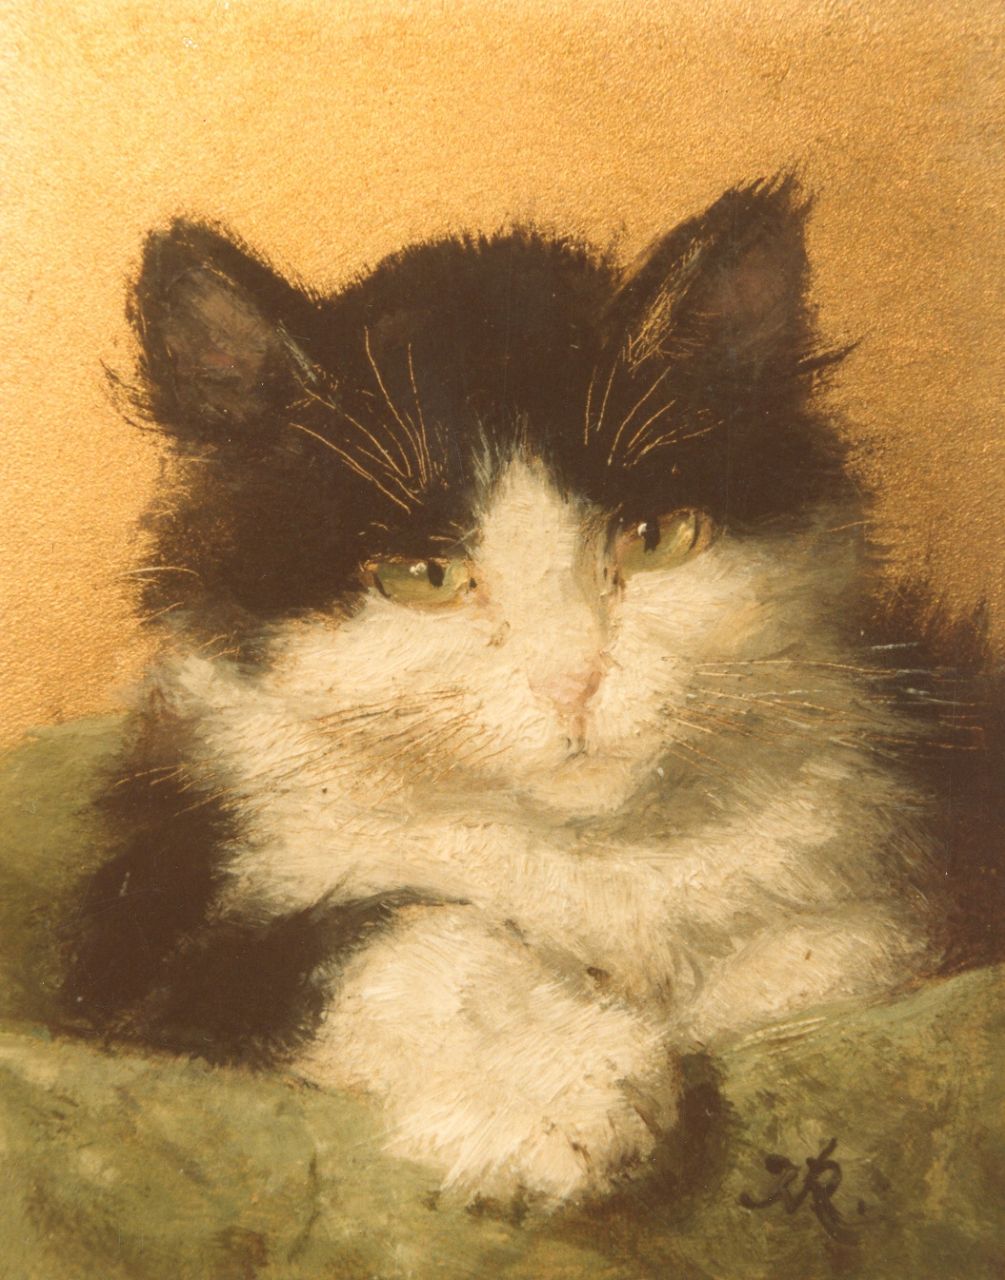 Ronner-Knip H.  | Henriette Ronner-Knip, Cat head, Öl auf Holz 10,2 x 8,2 cm, signed lower right with monogram